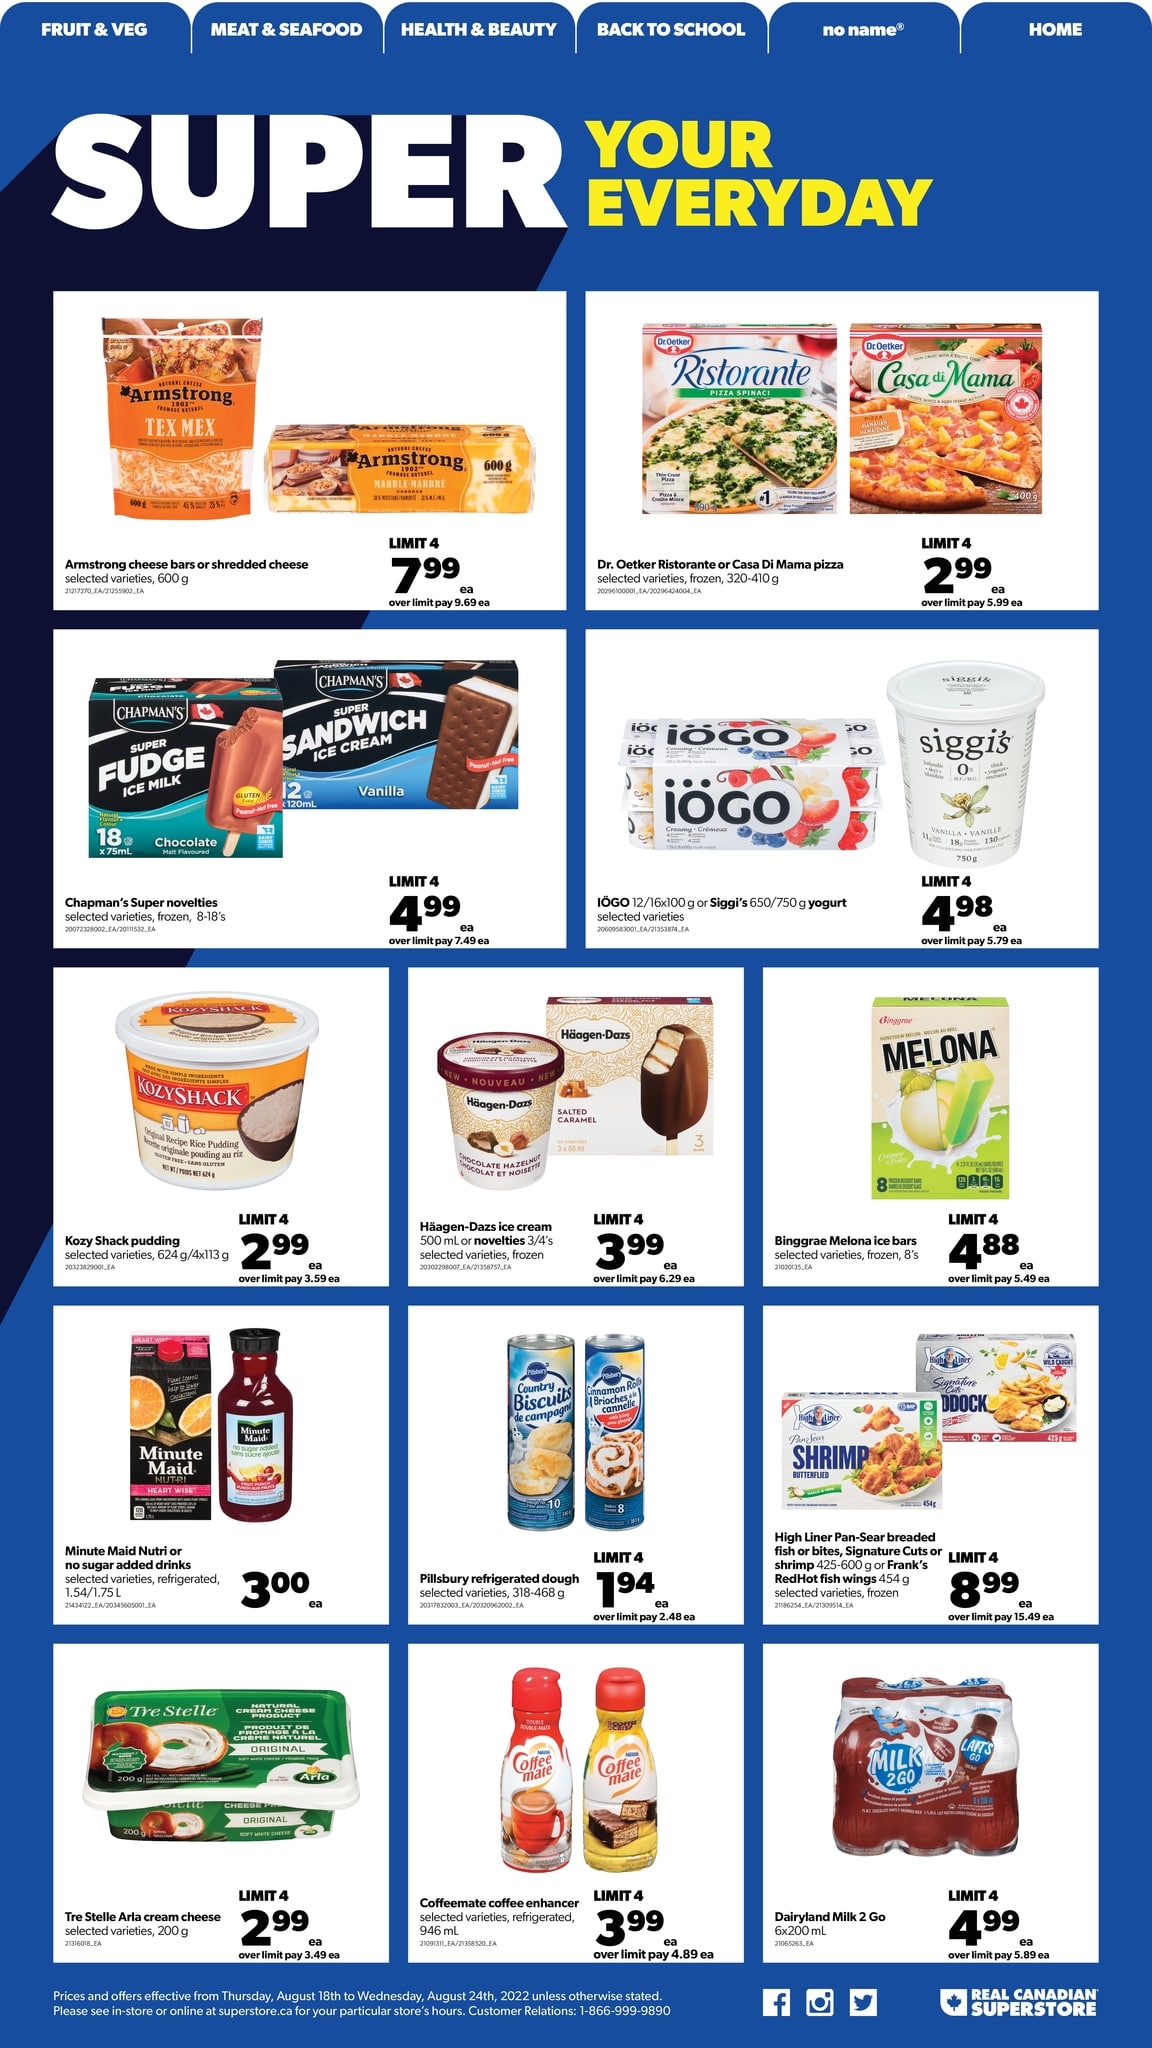 Real Canadian Superstore Western Canada - Weekly Flyer Specials - Page 18